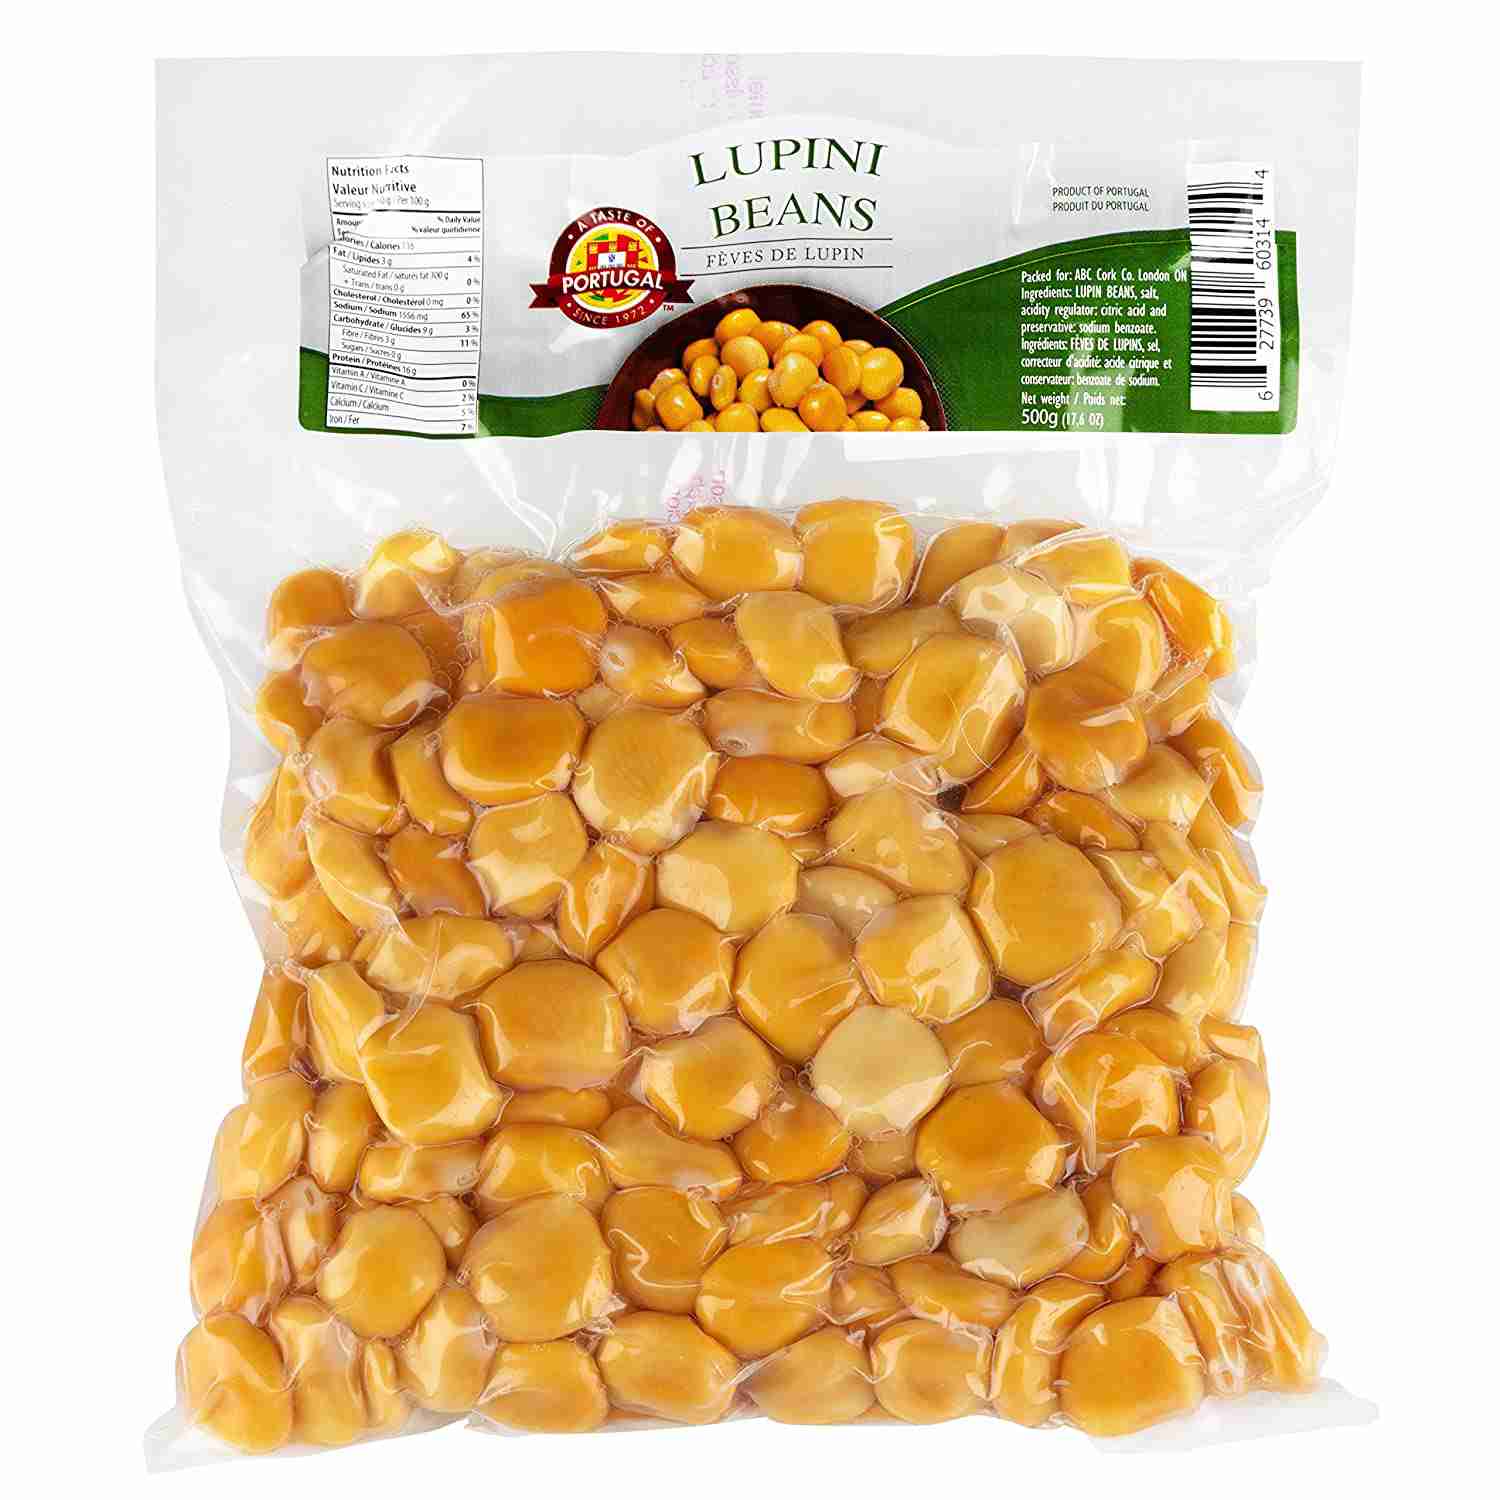 whole-lupini-beans-healthy-snacks-non-gmo-gluten-free-vegan with cash back rebate